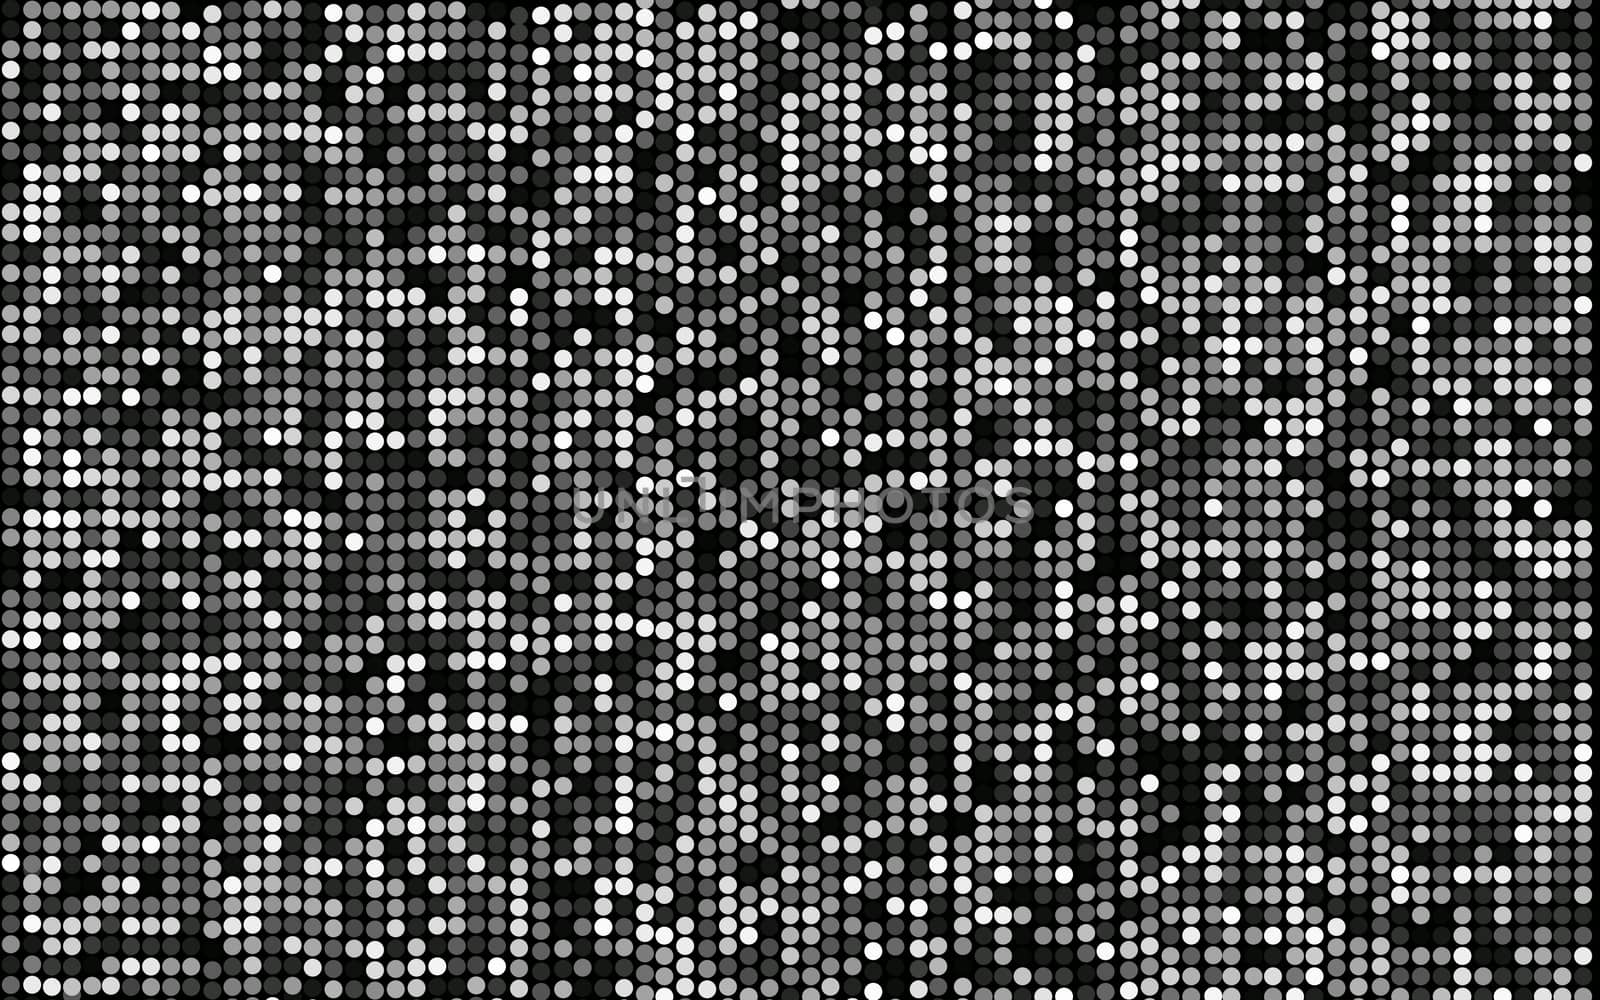 black and white dots stage background